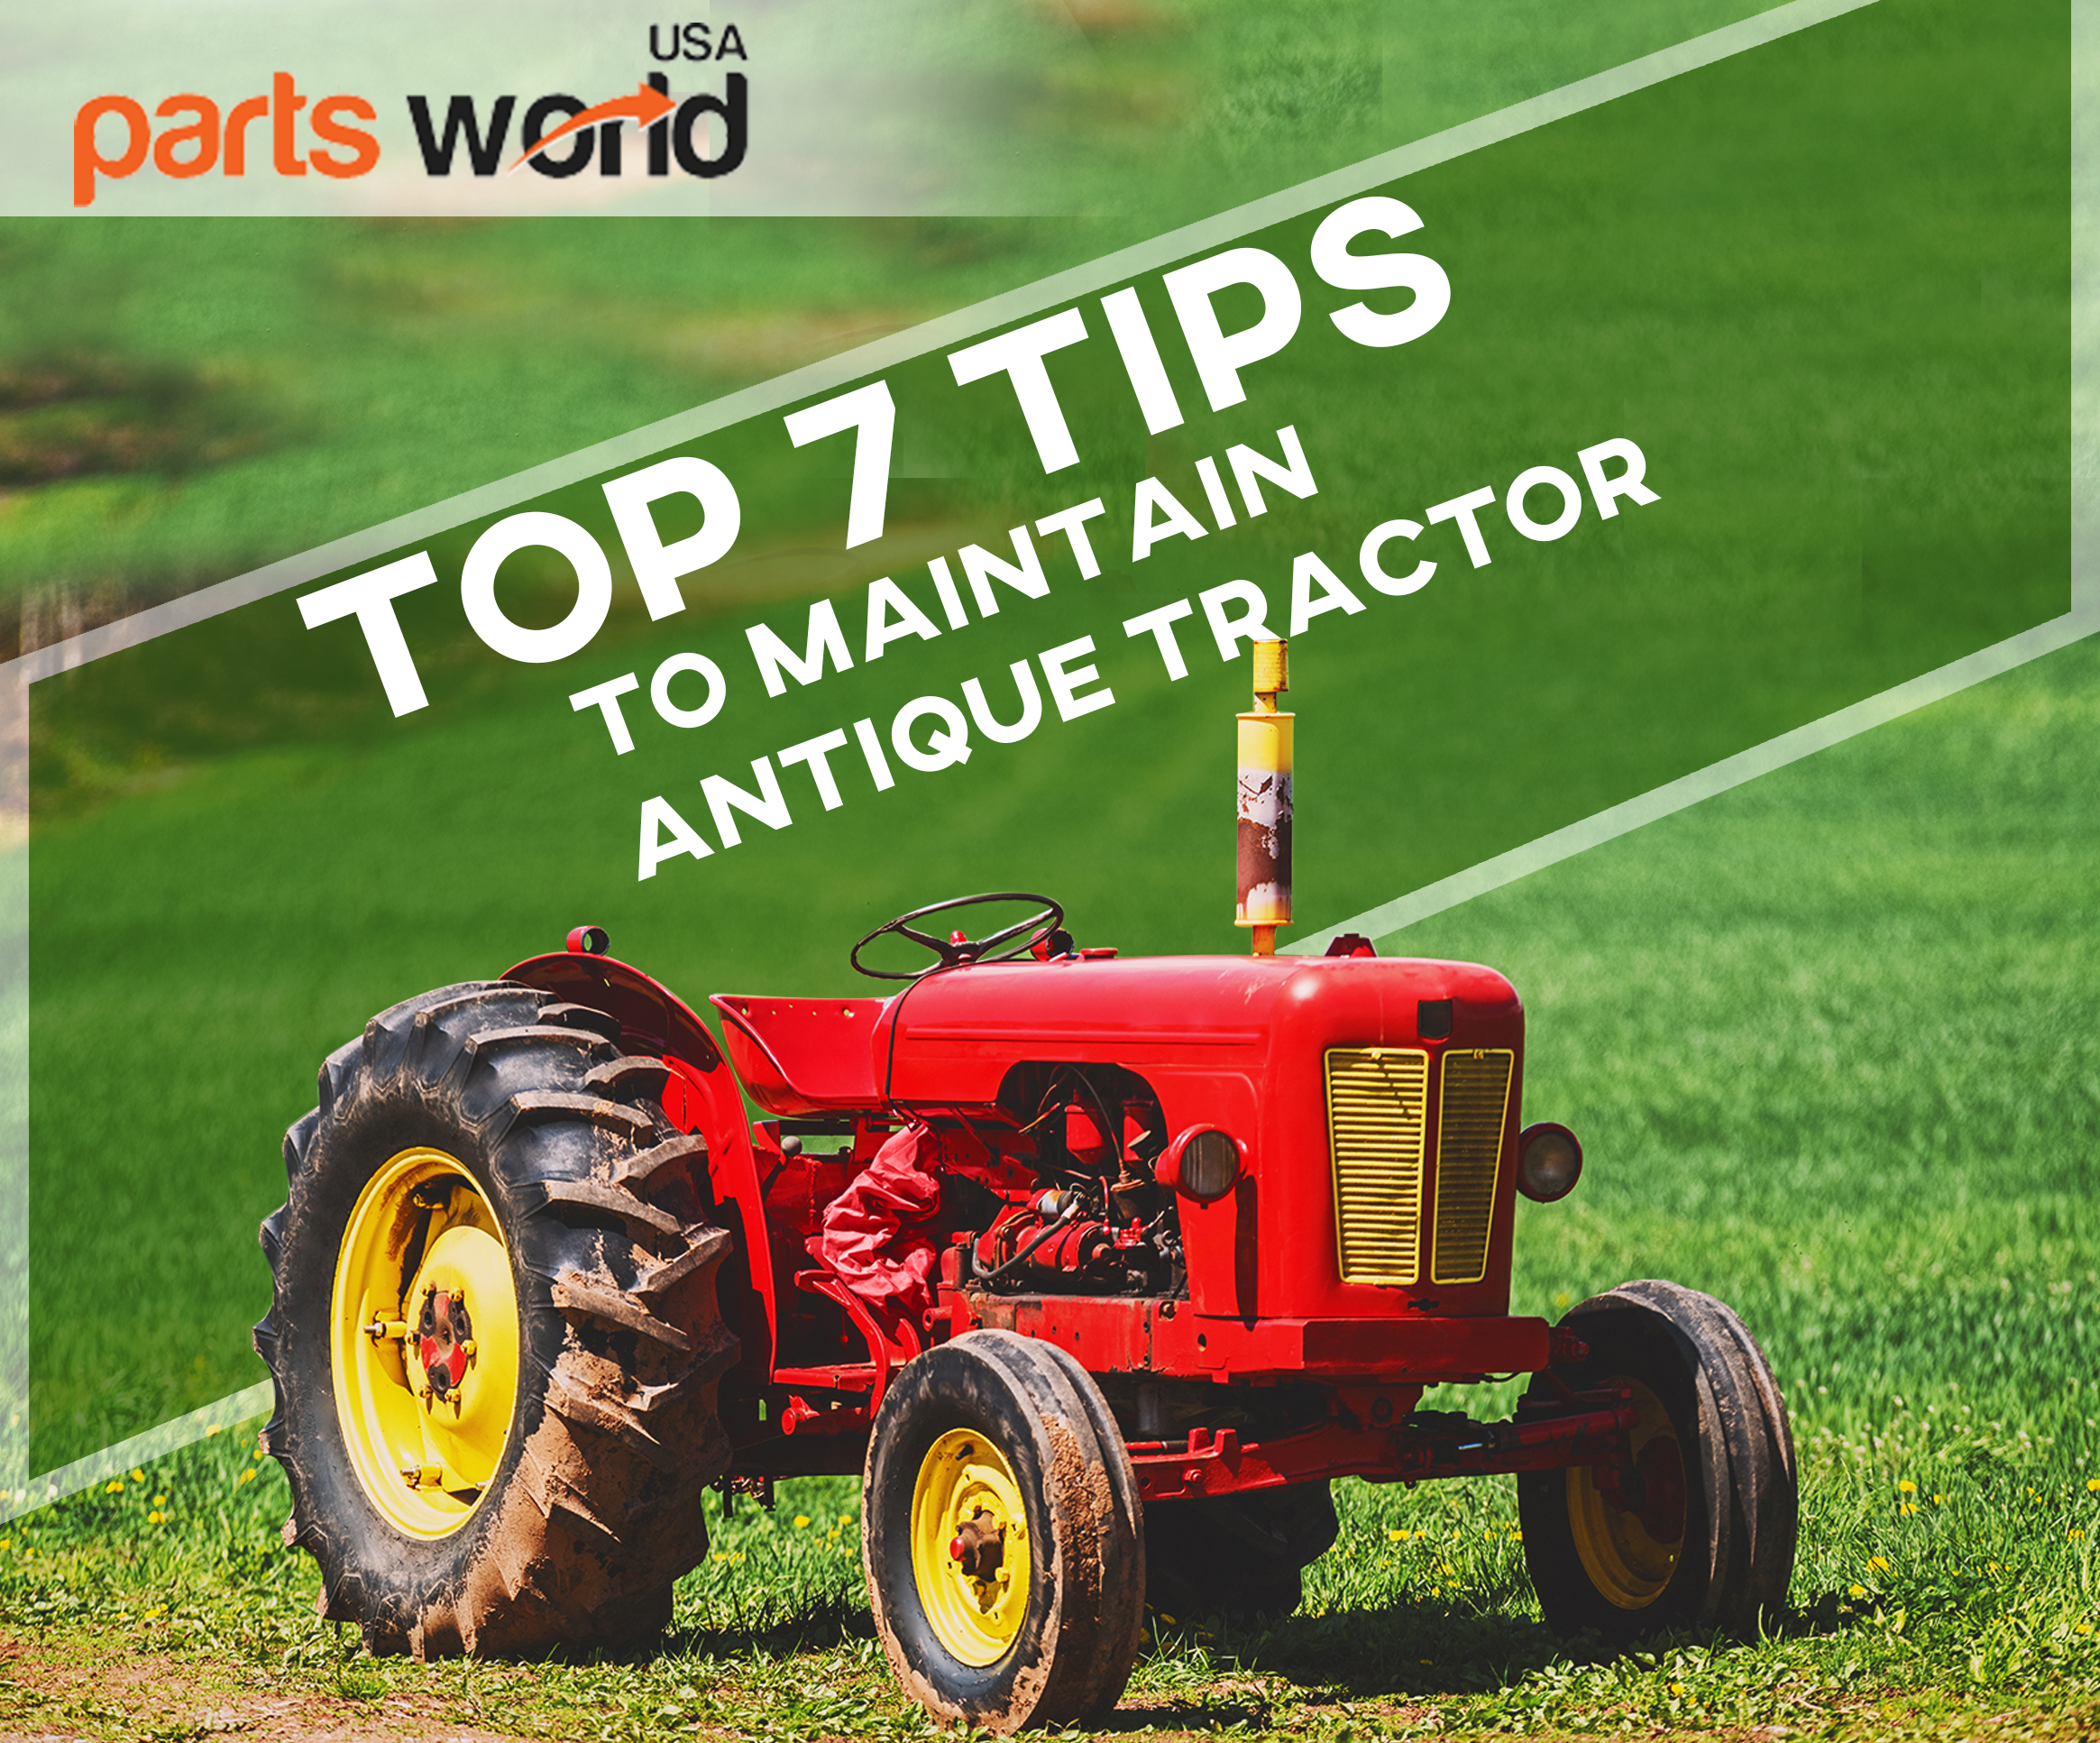 How To Take Care of Your Antique Tractor?